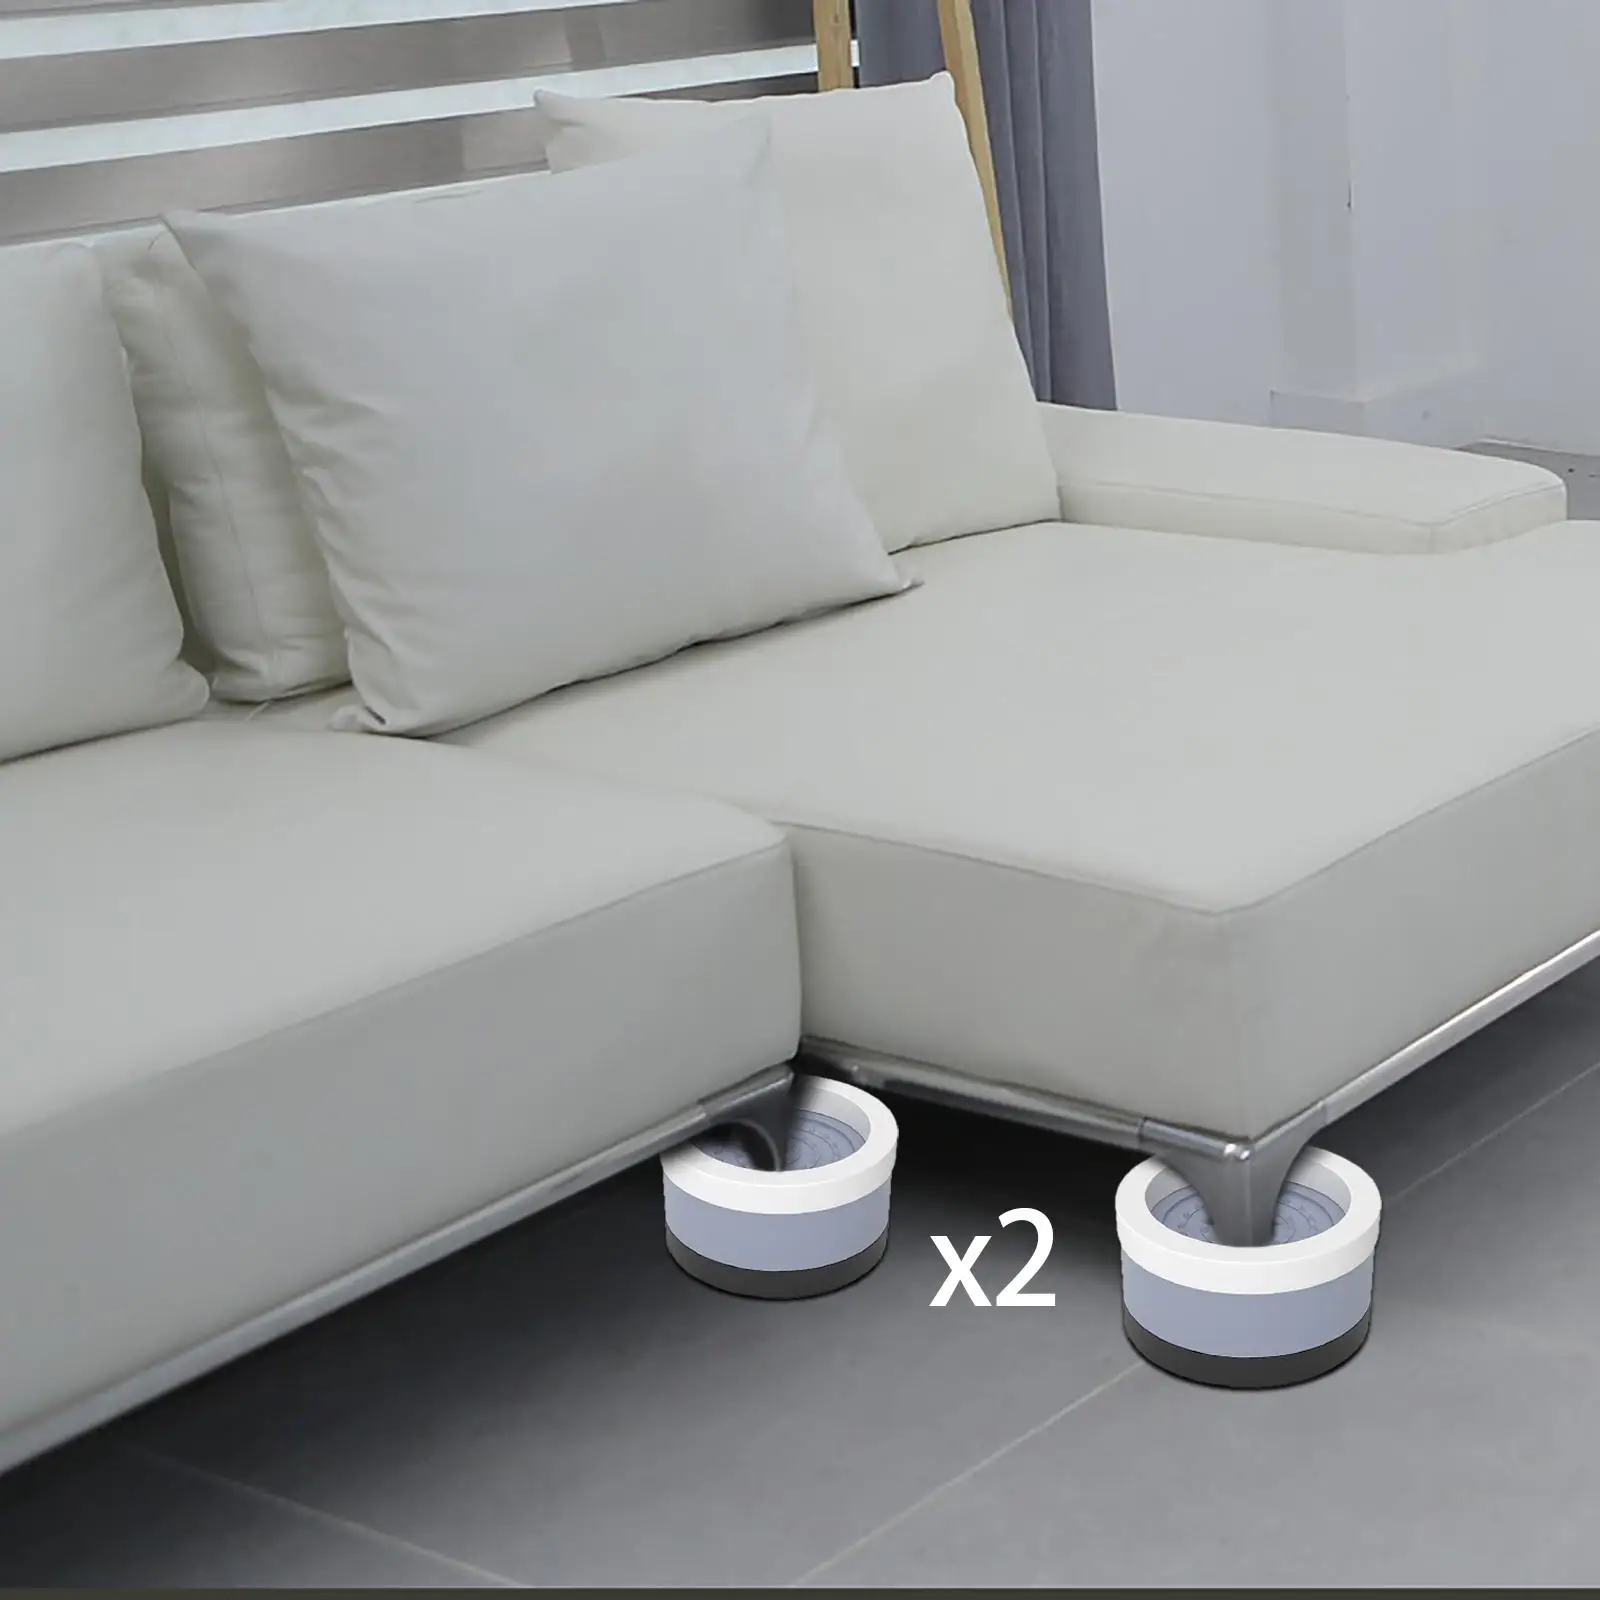 4 Pieces Bed Furniture Riser for Bed  Couch Legs Feet Table